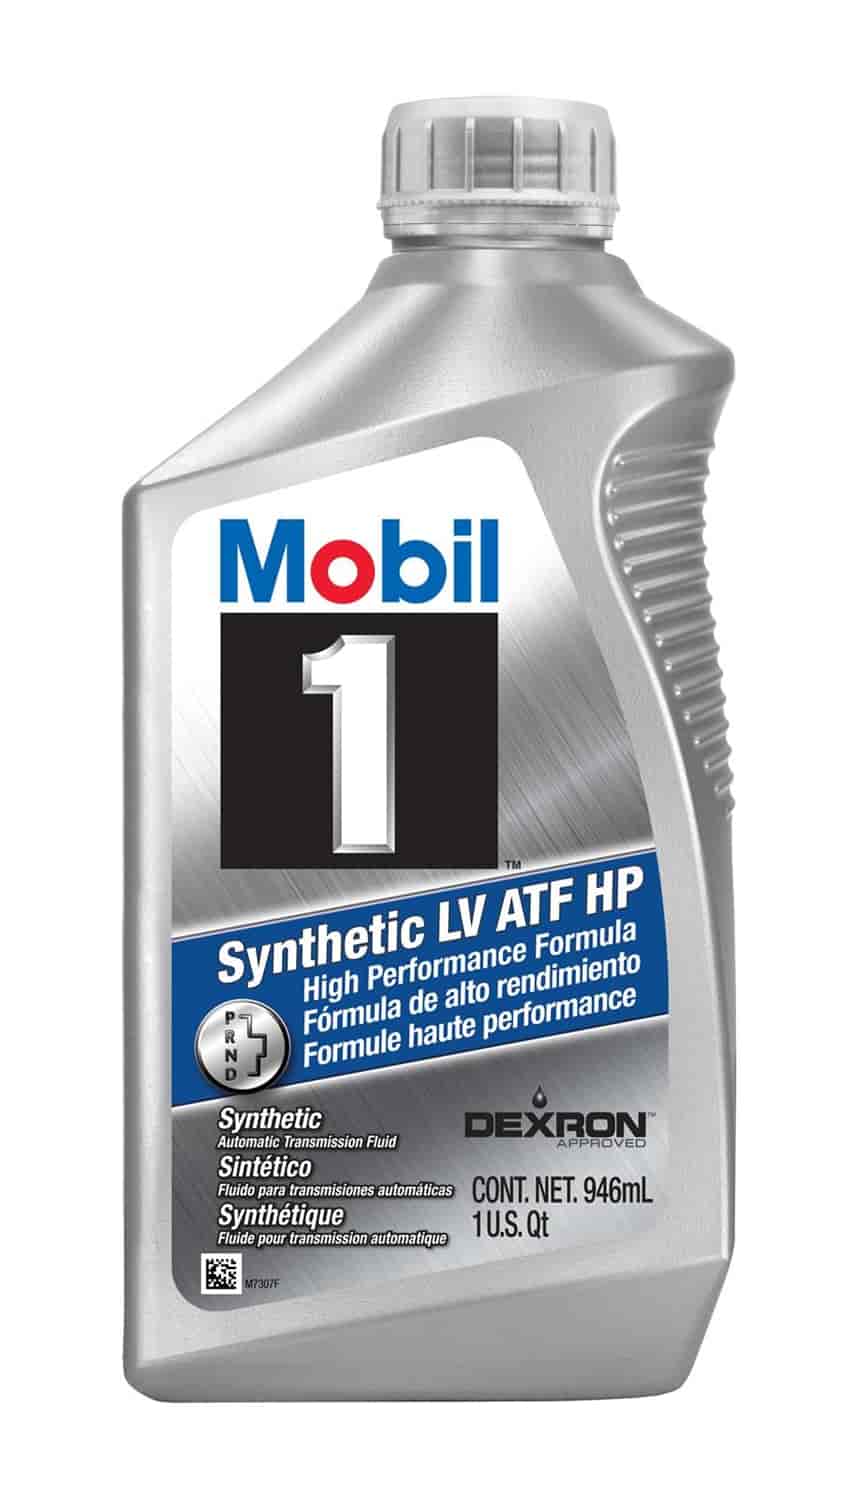 Is Motorcraft Mercon LV Synthetic To Offer A Smooth Car Shifting? 